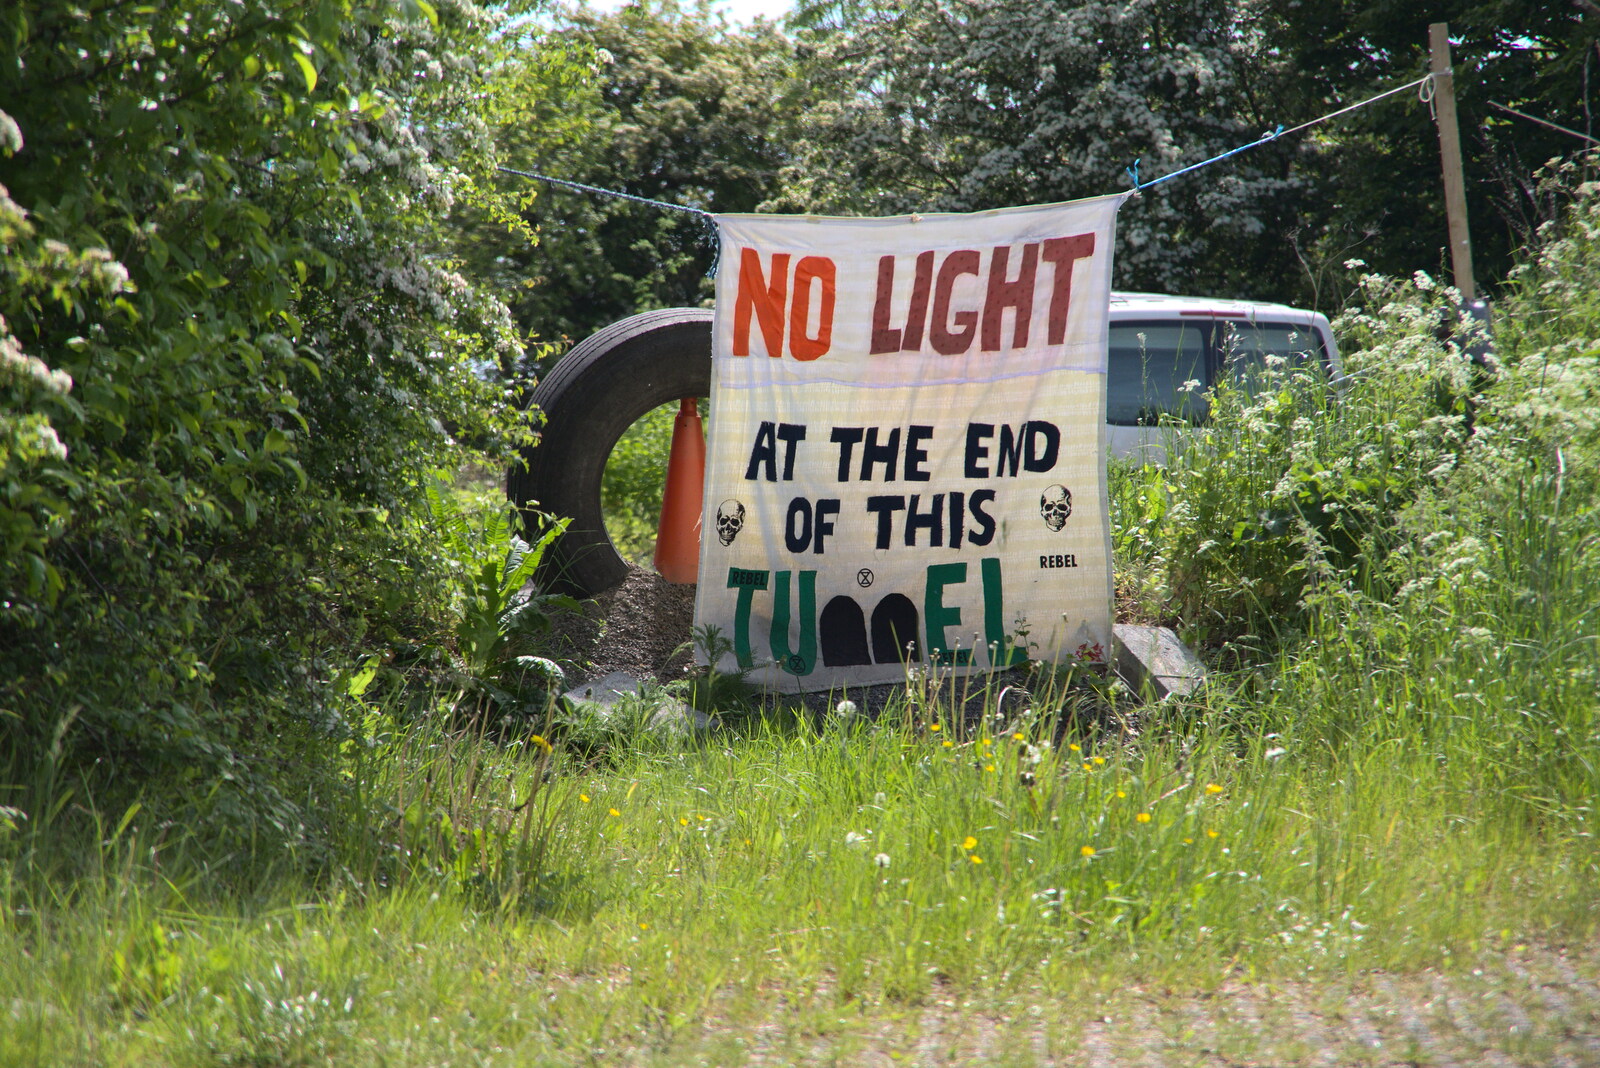 There's a big protest banner on the A303 from A Trip to Grandma J's, Spreyton, Devon - 2nd June 2021